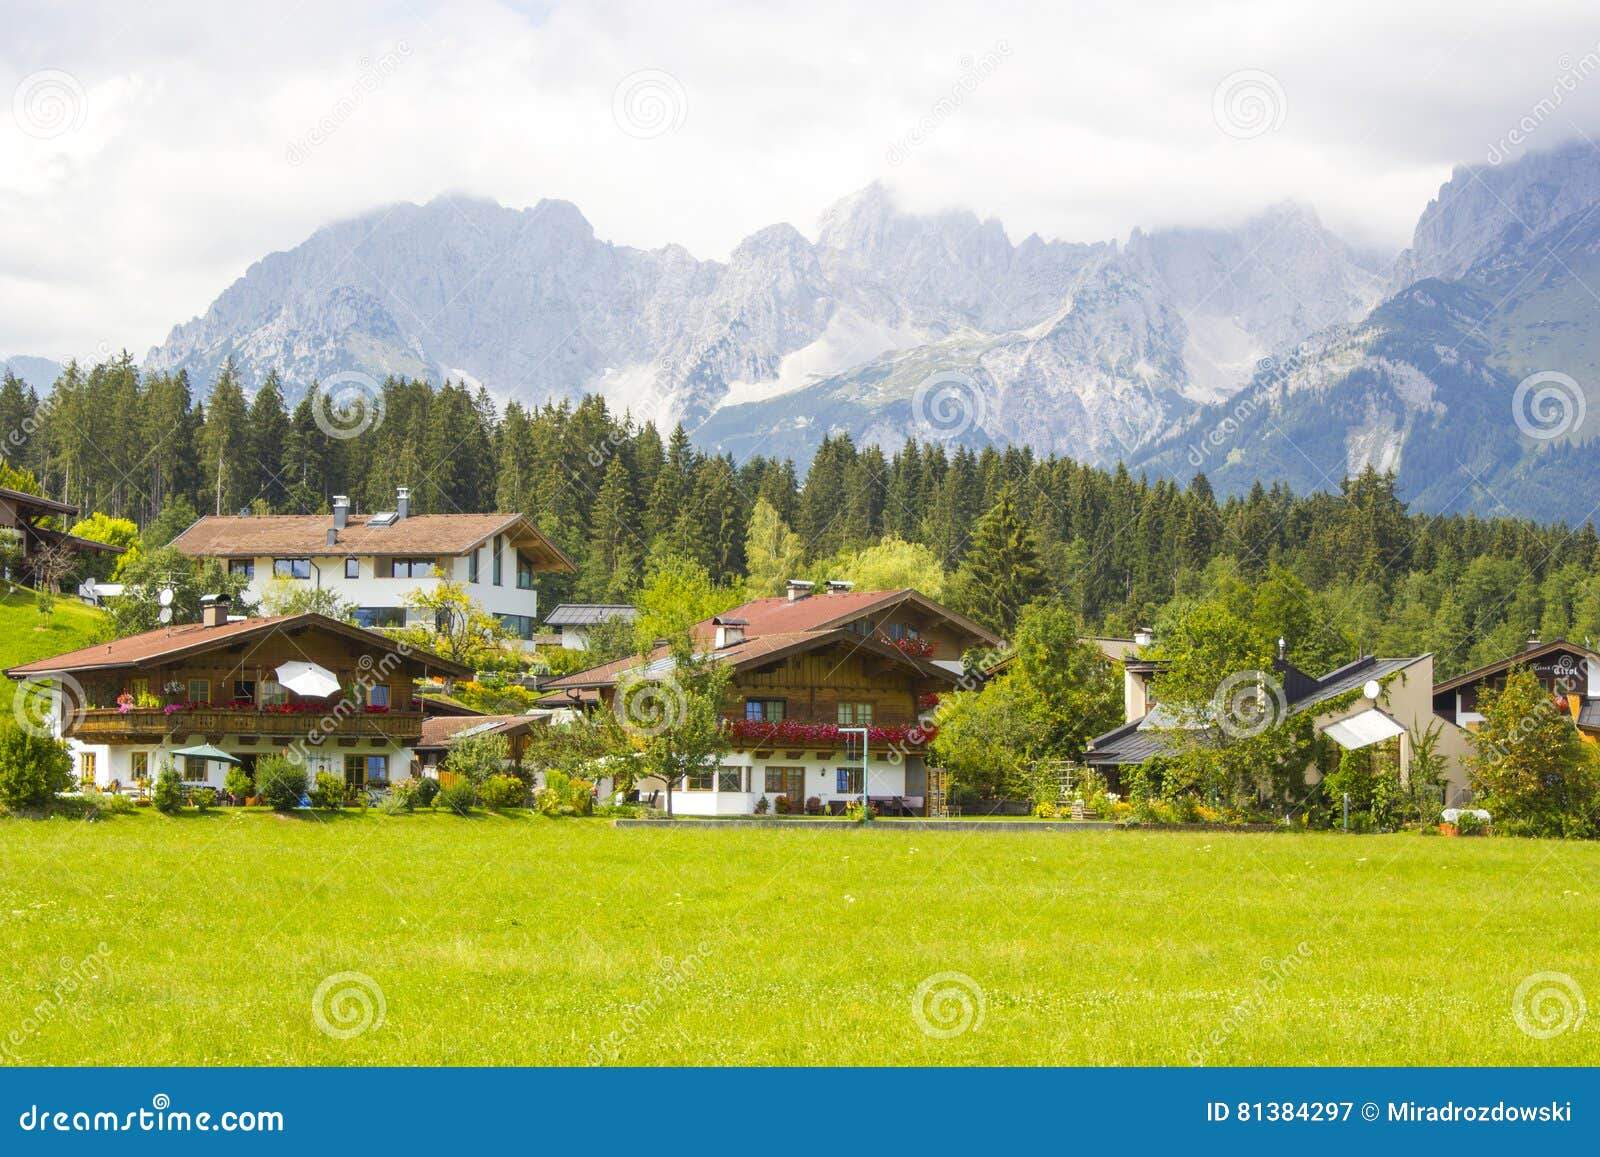 A Complete Travel Guide to Oberndorf bei Kitzbühel, Austria: Attractions, Accommodations, Dining, and Day Trips